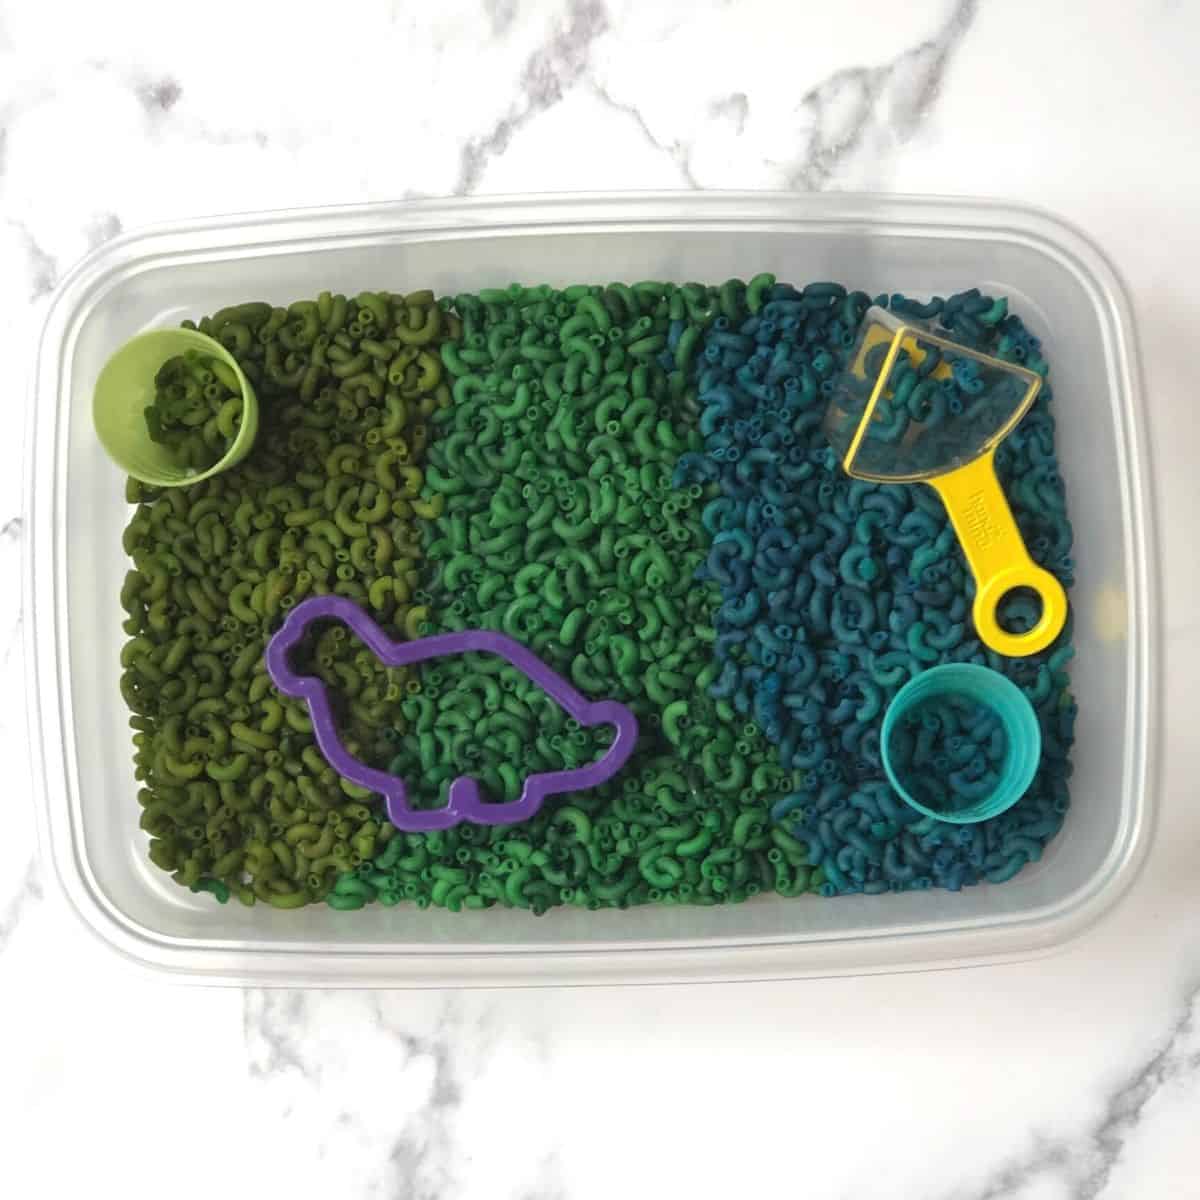 dyed macaroni noodles in a sensory bin with two cups, a measuring cup and a dinosaur cookie cutter